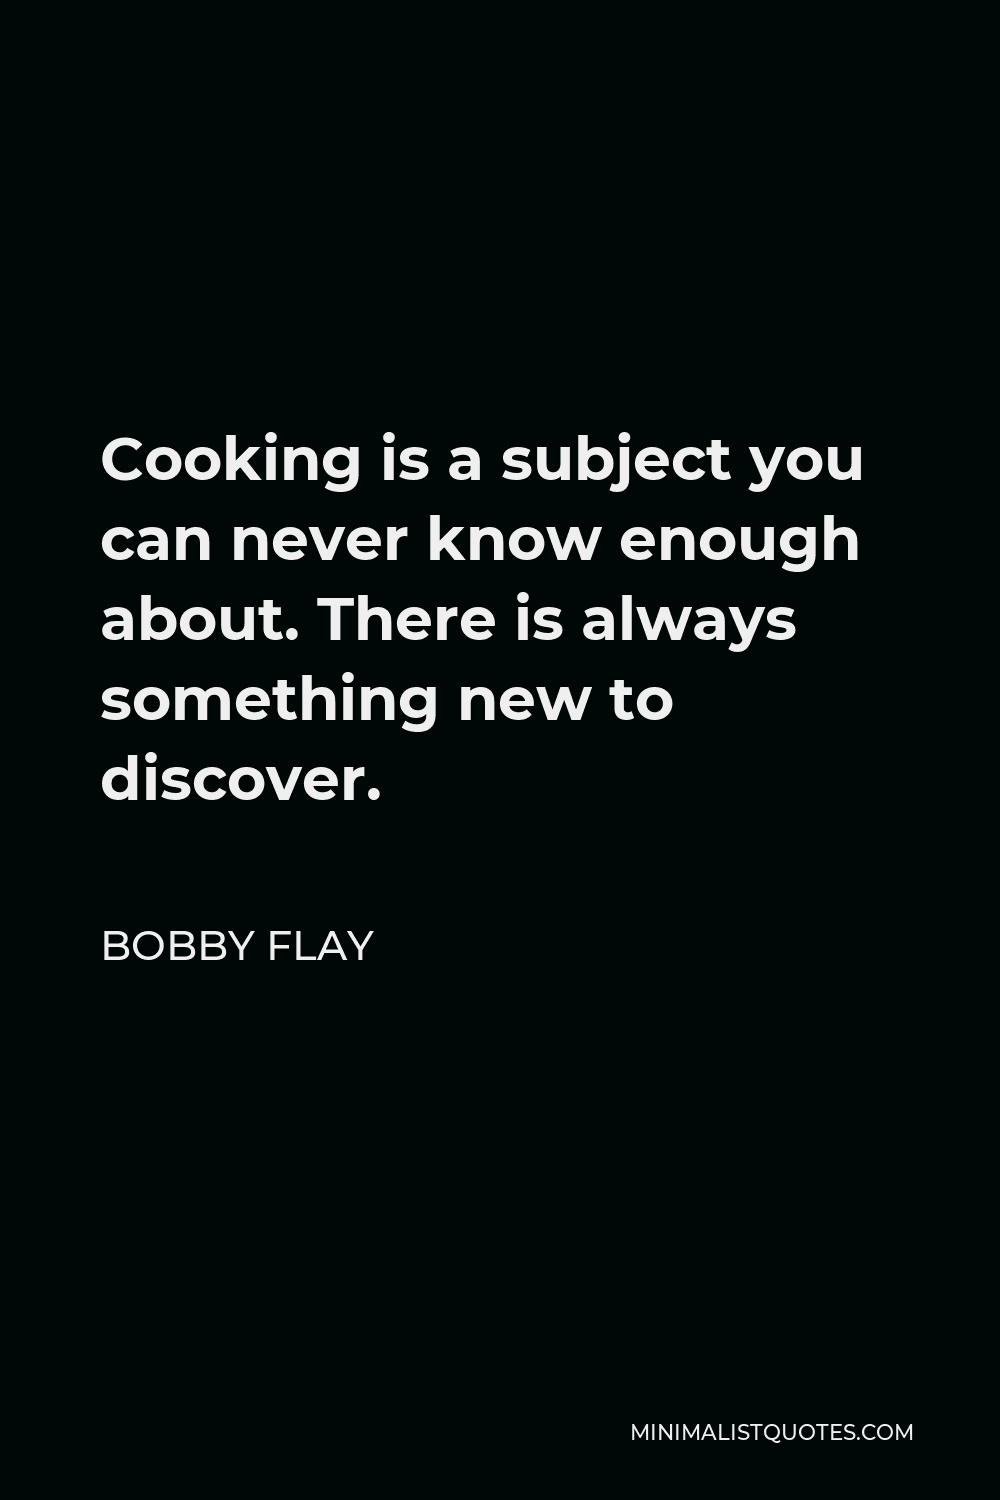 Bobby Flay Quote - Cooking is a subject you can never know enough about. There is always something new to discover.